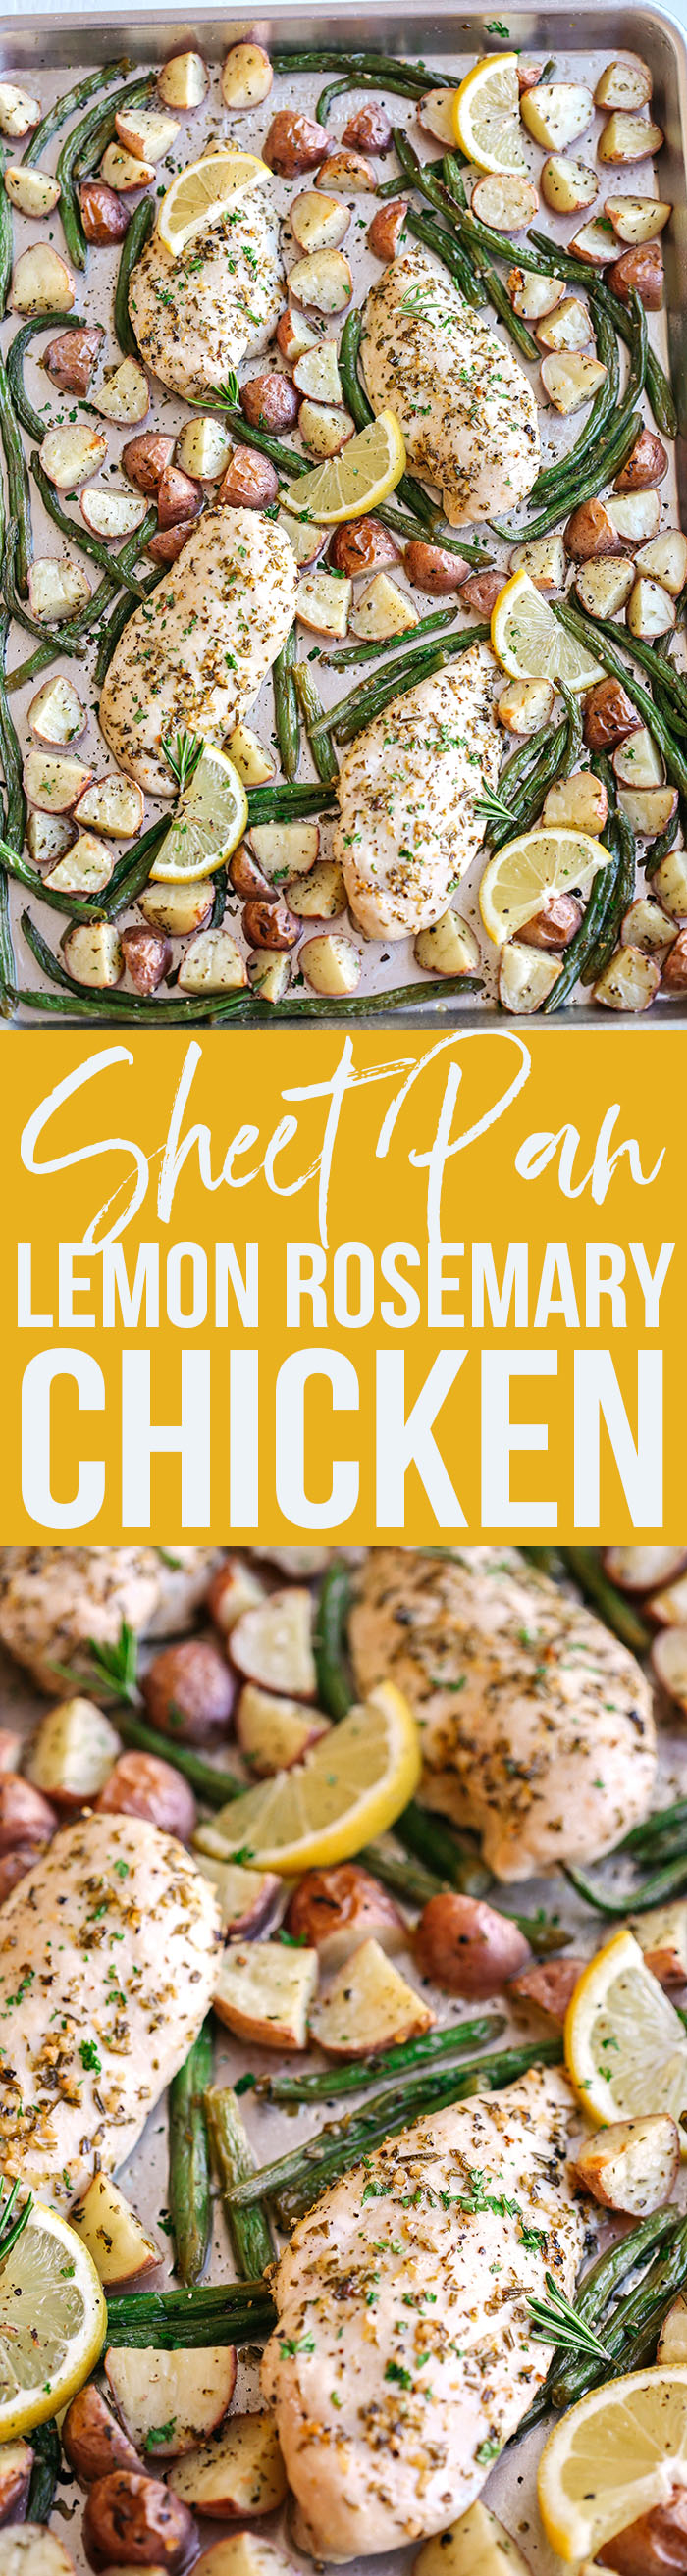 This Sheet Pan Lemon Rosemary Chicken and Potatoes make the perfect weeknight dinner that's quick, healthy and easily made all on one pan!